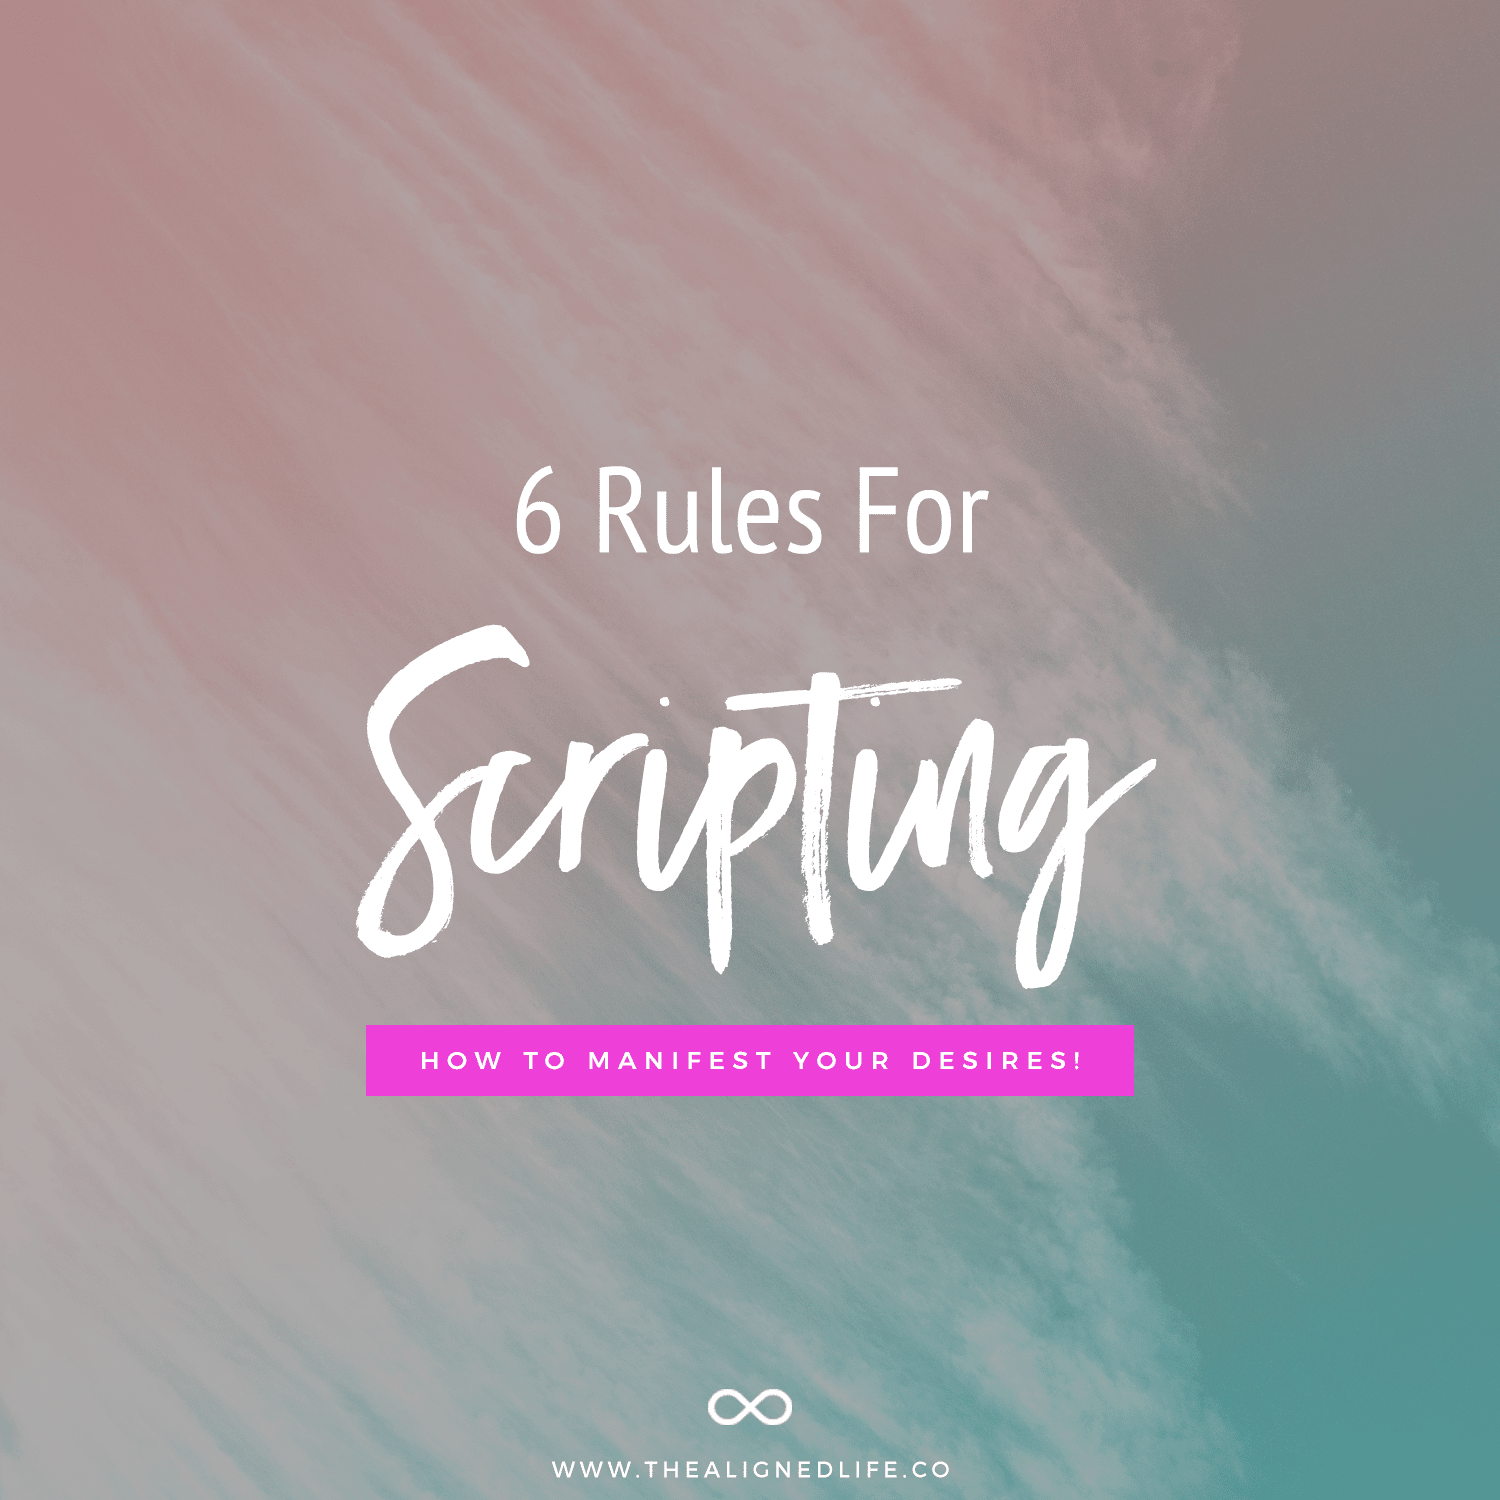 pastel background with text 6 Rules For Scripting: How To Manifest Your Desires